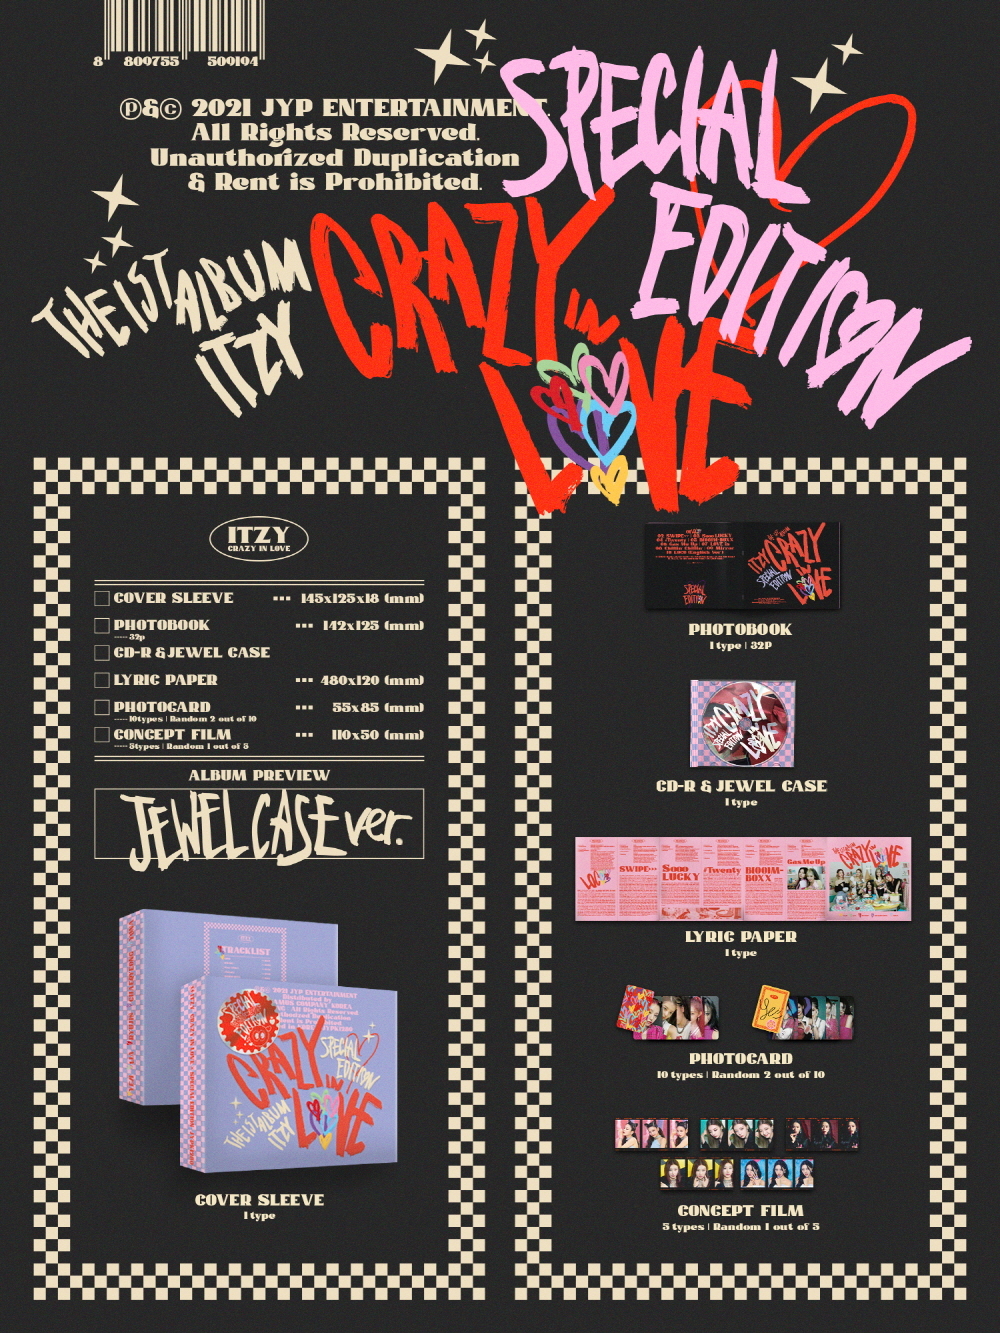 ITZY - The 1st Album [CRAZY IN LOVE] Special Edition (JEWEL CASE ver.) special love album edition itzy photobook 1st crazy